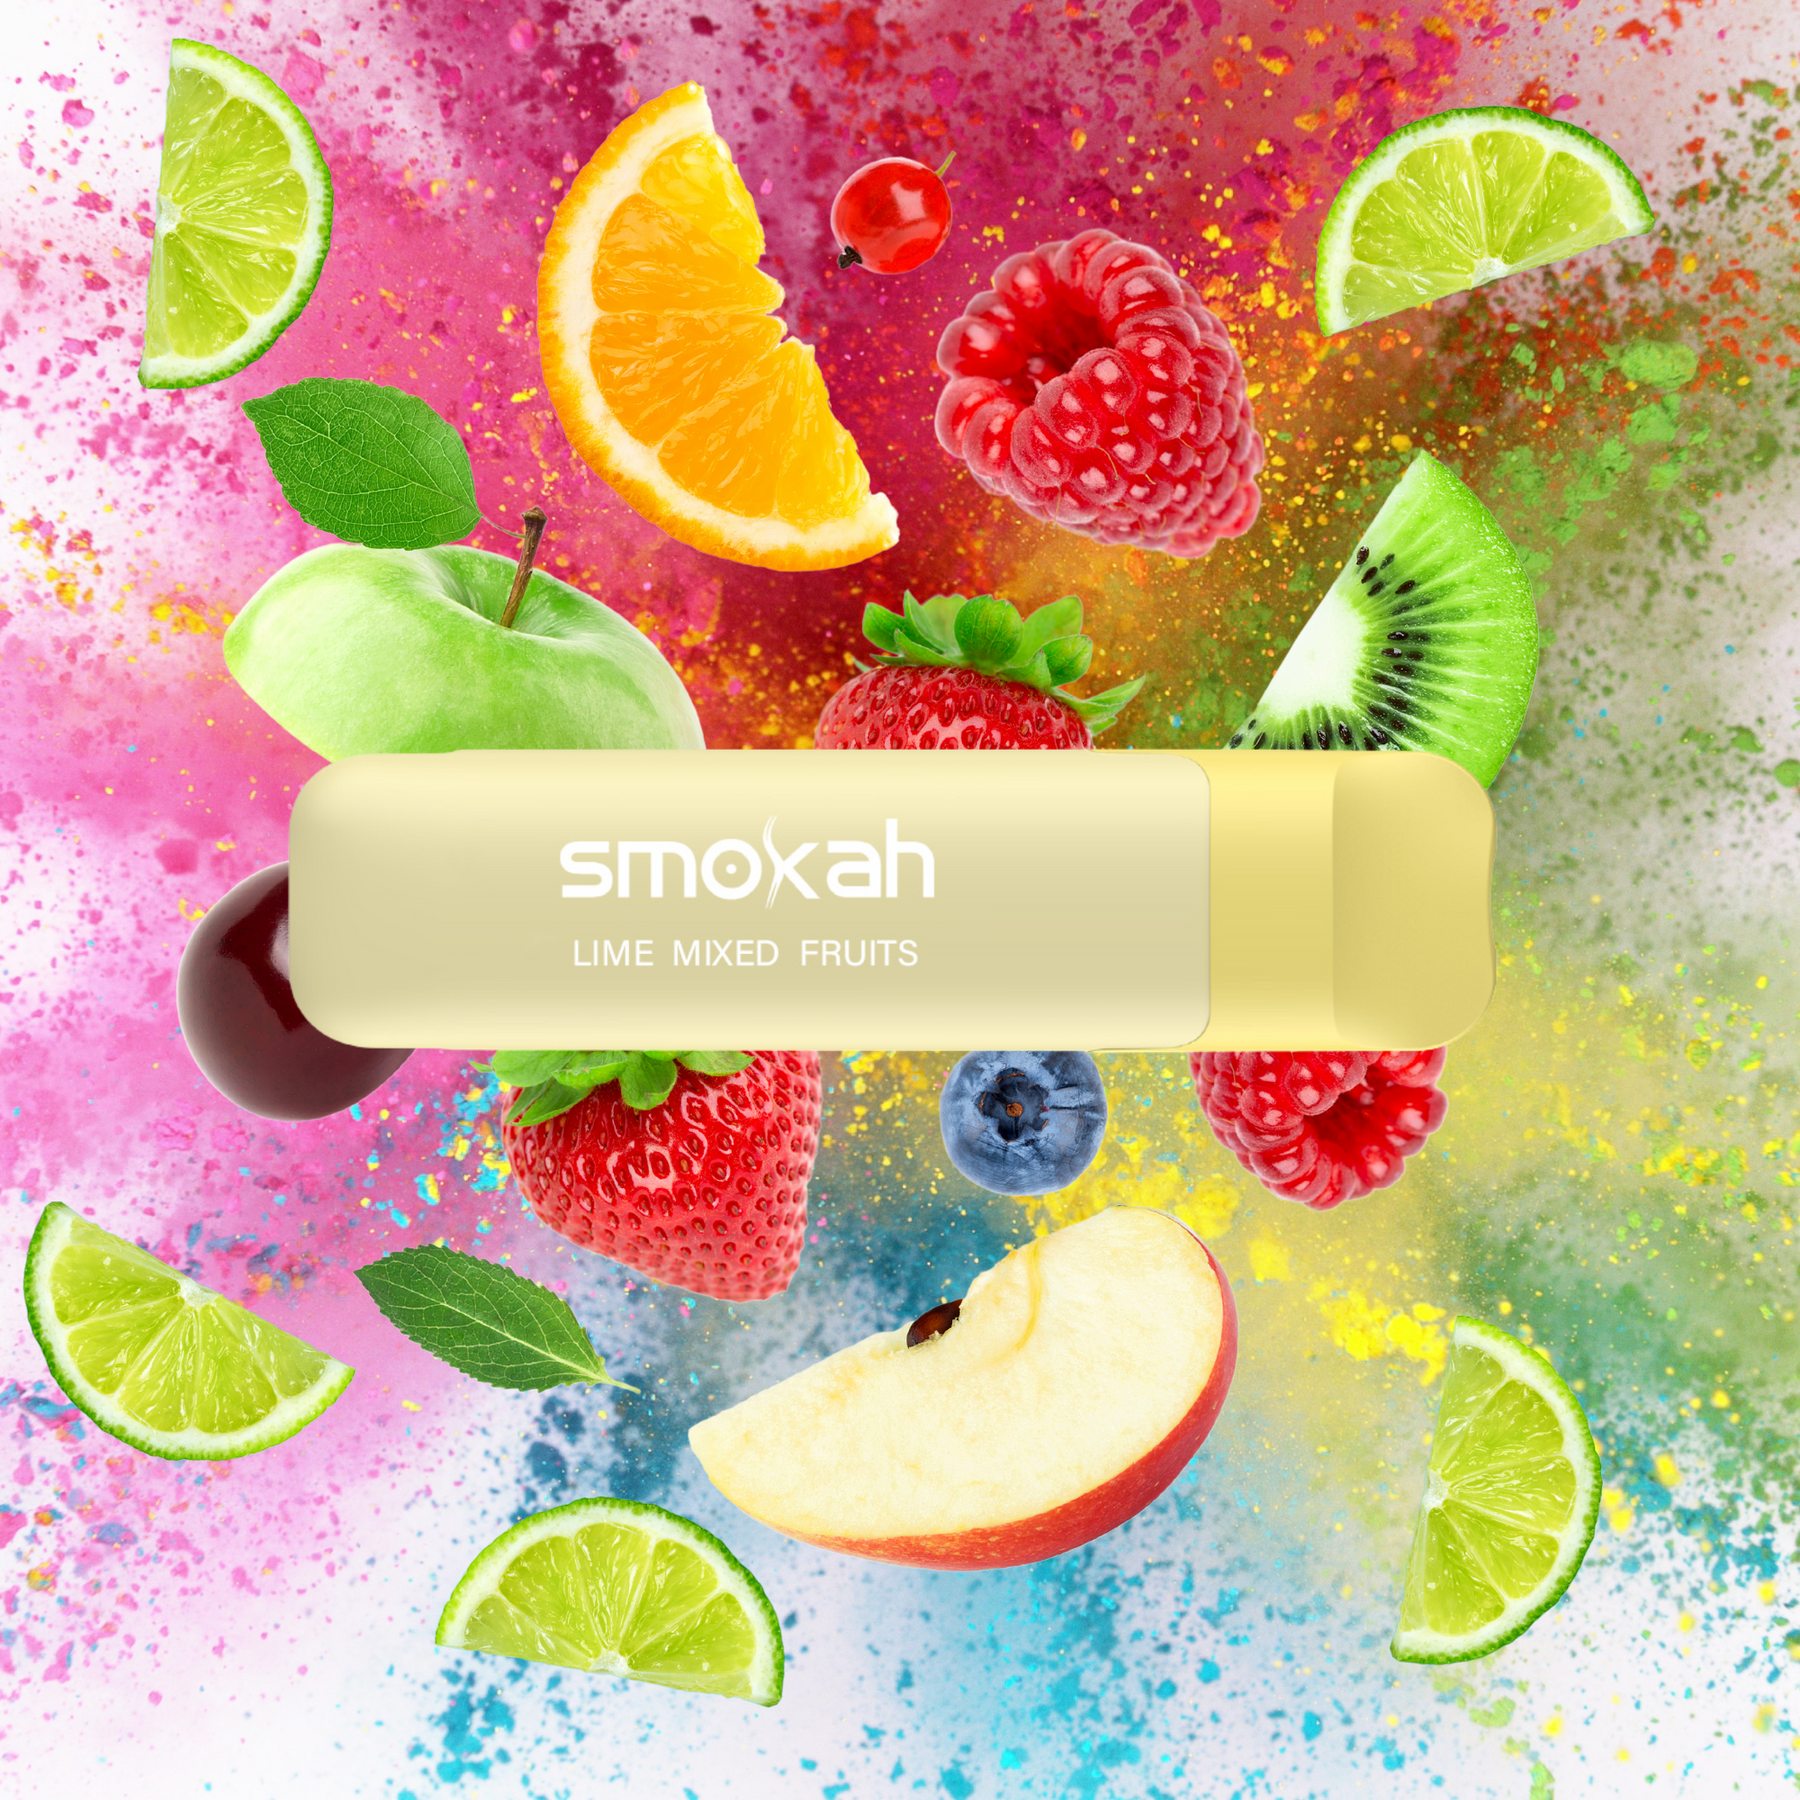 Smokah GLAMEE Lime mixed fruits " Frucht Mix" 10er Packung / Display (Sparset)